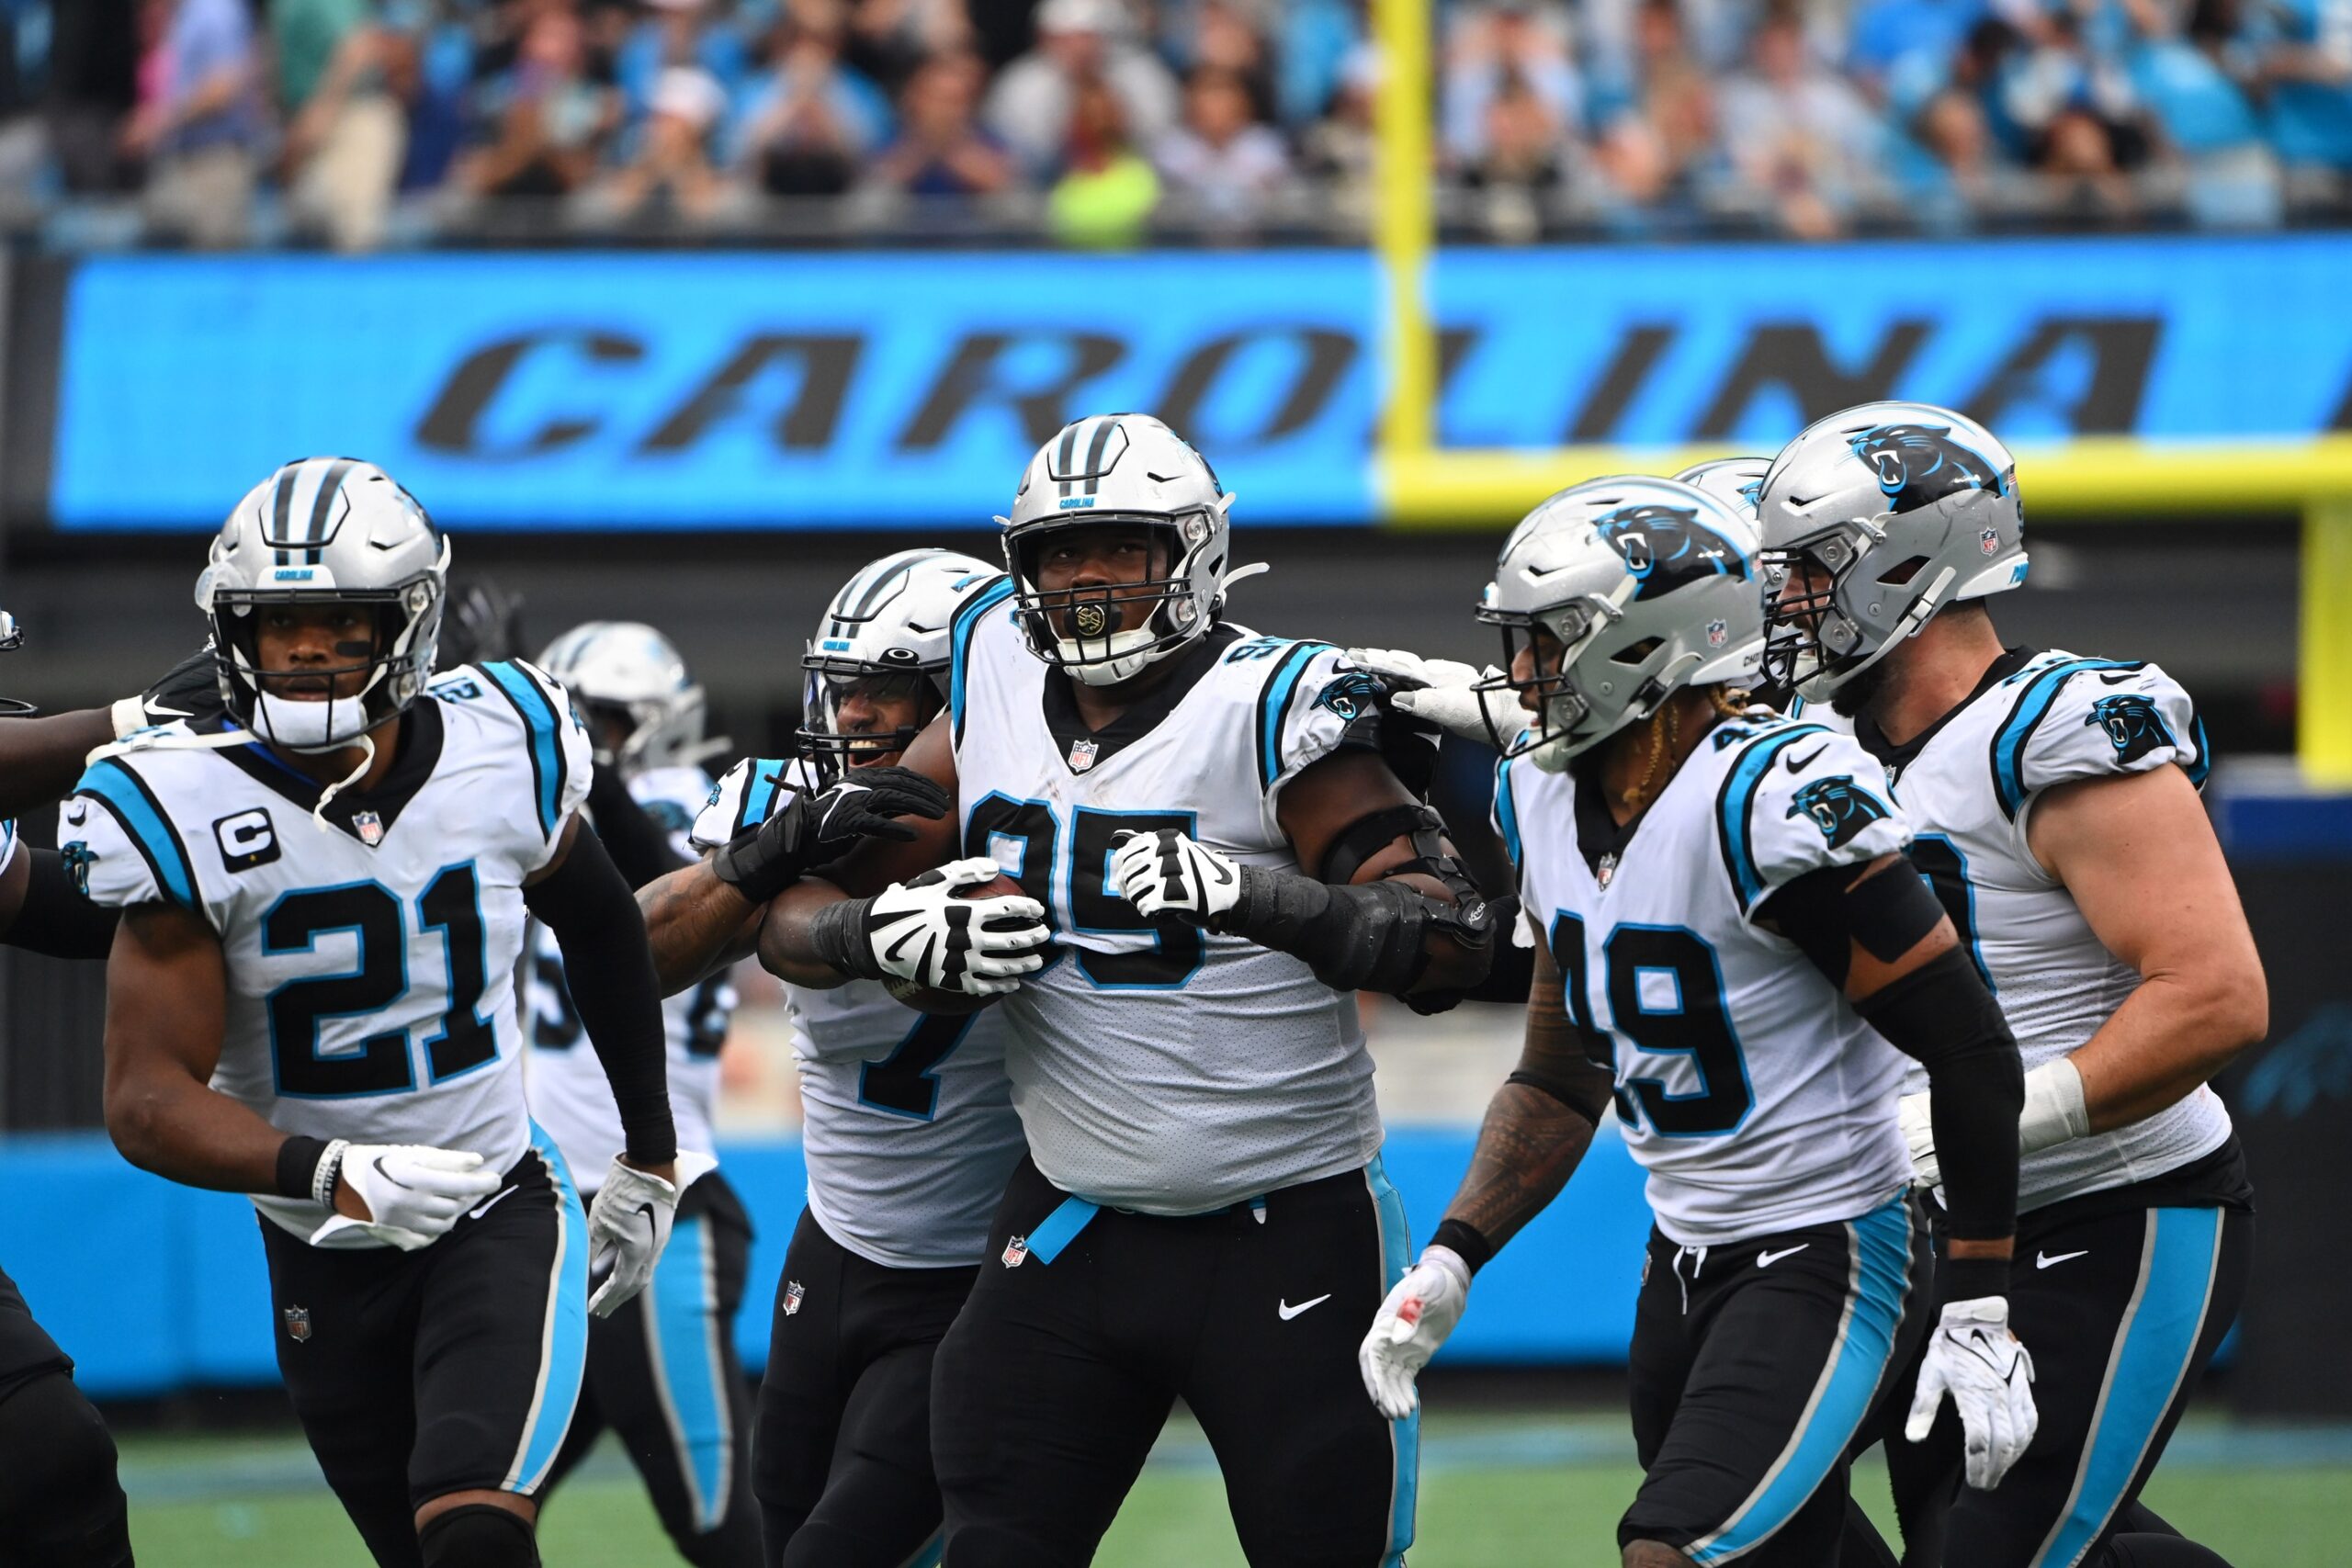 Derrick Brown (95) celebrates with safety Jeremy Chinn (21) and linebacker Shaq Thompson (7) and linebacker Frankie Luvu (49) and defensive tackle Matt Ioannidis (99) after intercepting a pass in the fourth quarter at Bank of America Stadium.